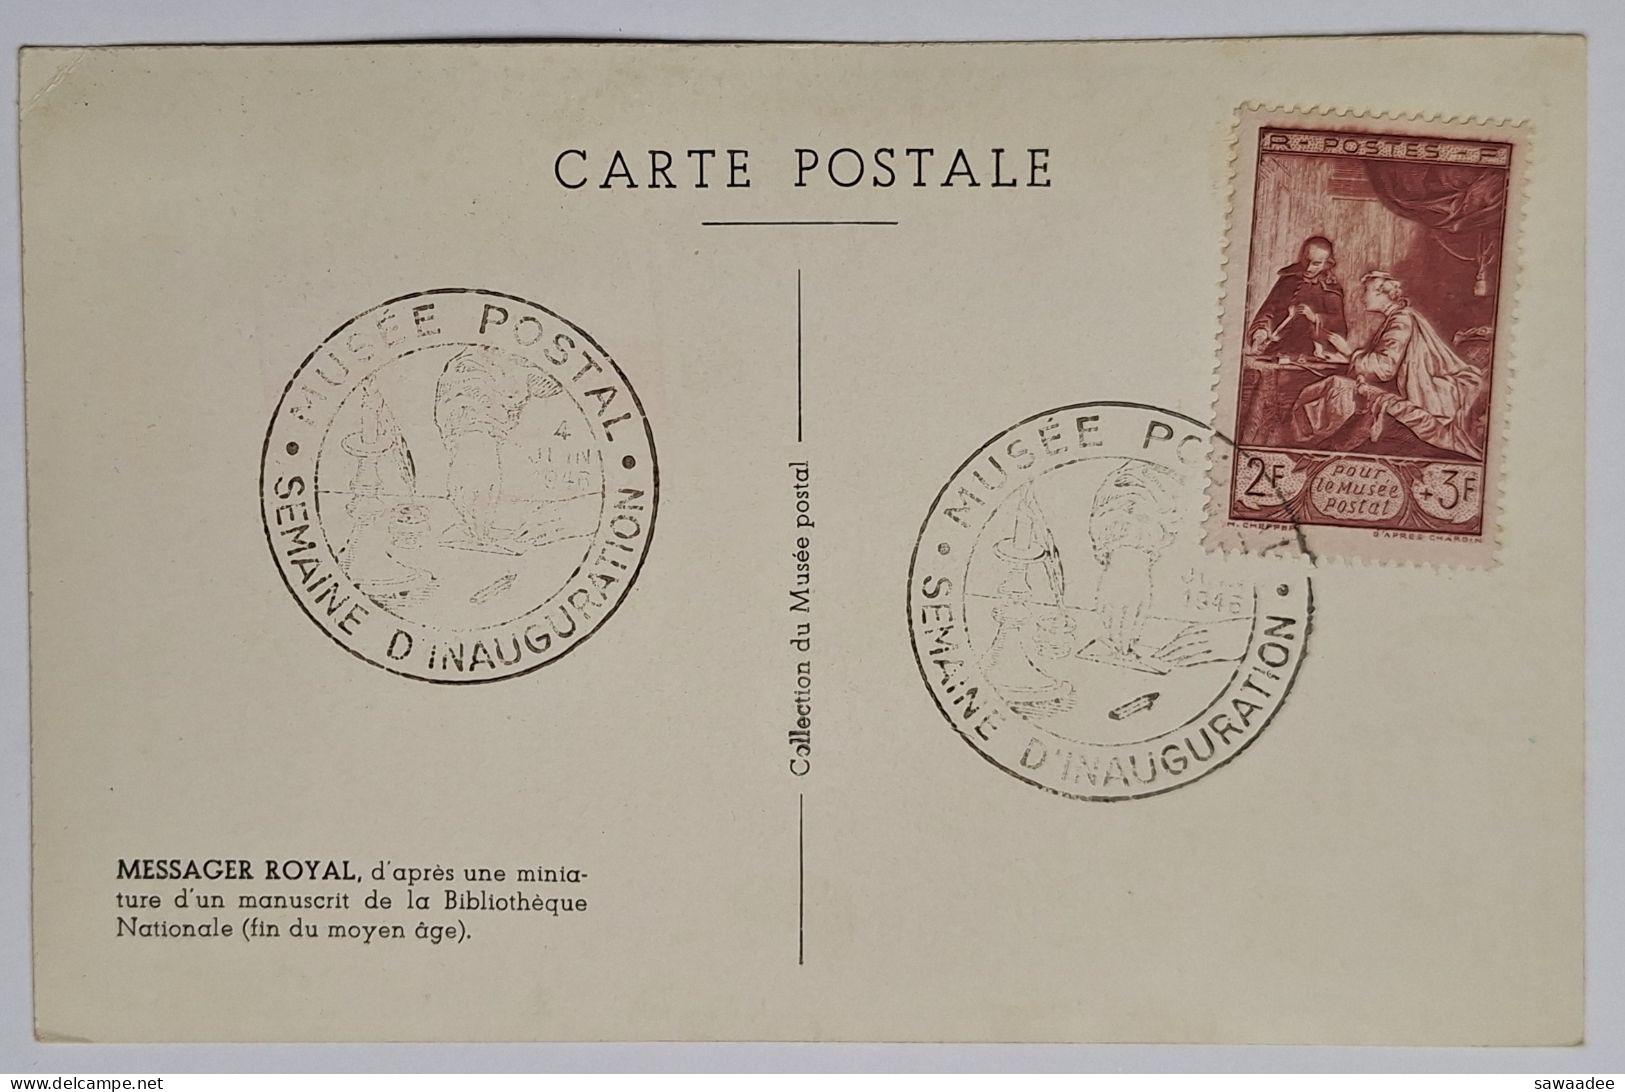 CARTE POSTALE FRANCE - MUSEE POSTAL - SEMAINE D'INAUGURATION - MESSAGER ROYAL - Post